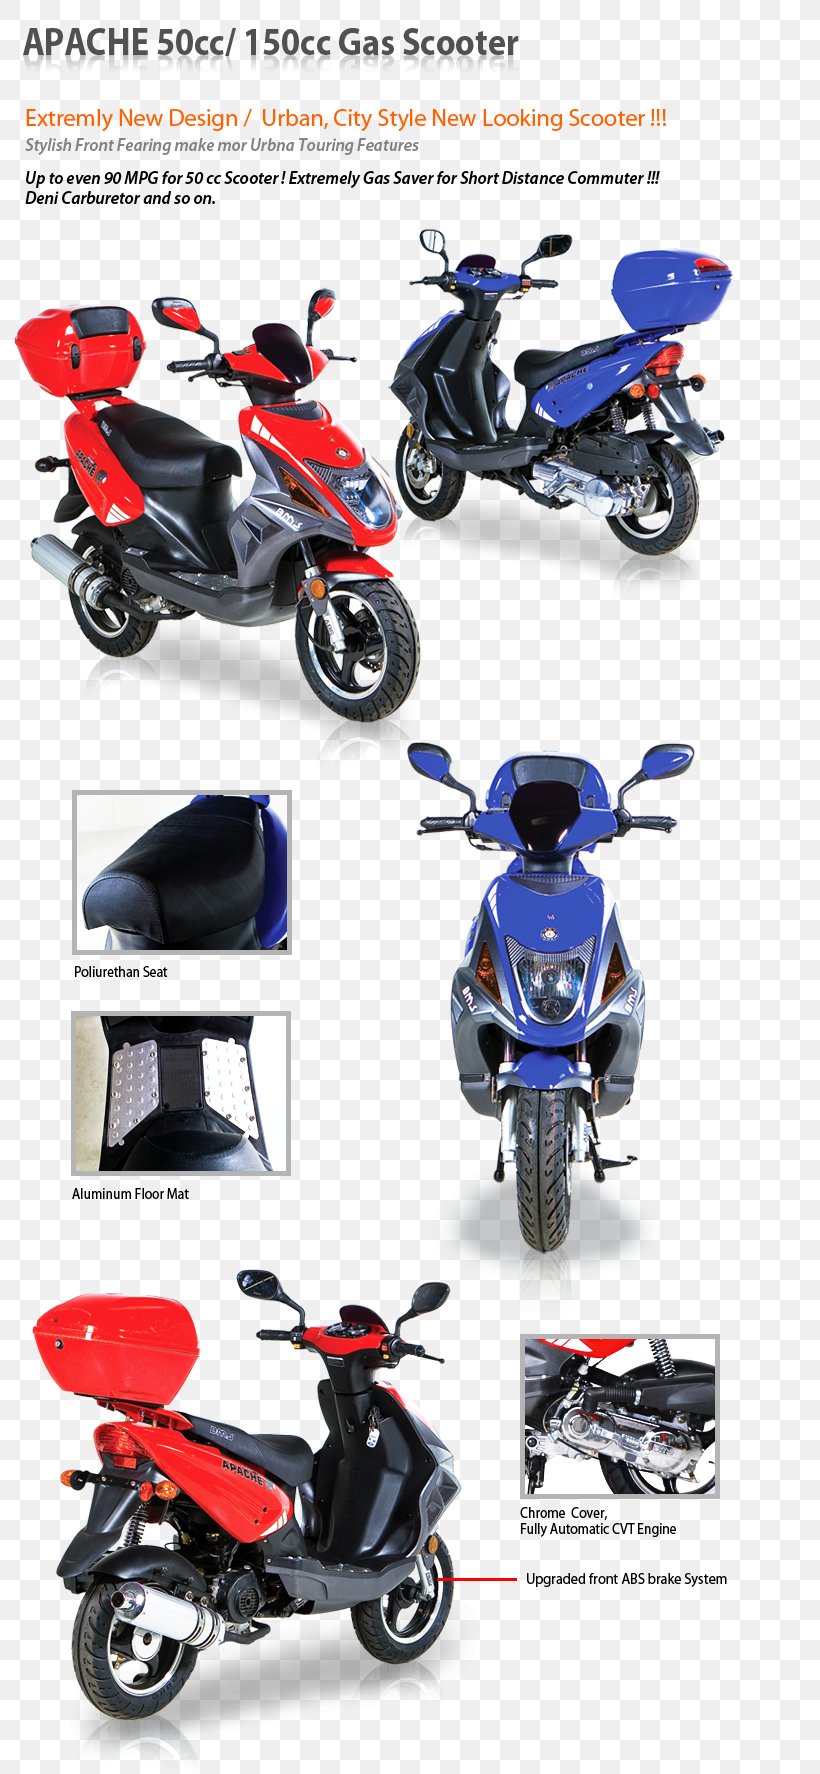 Scooter Motorcycle Accessories Car Motor Vehicle Motorcycle Fairing, PNG, 807x1774px, Scooter, Aircraft Fairing, Automotive Design, Bicycle, Bicycle Accessory Download Free